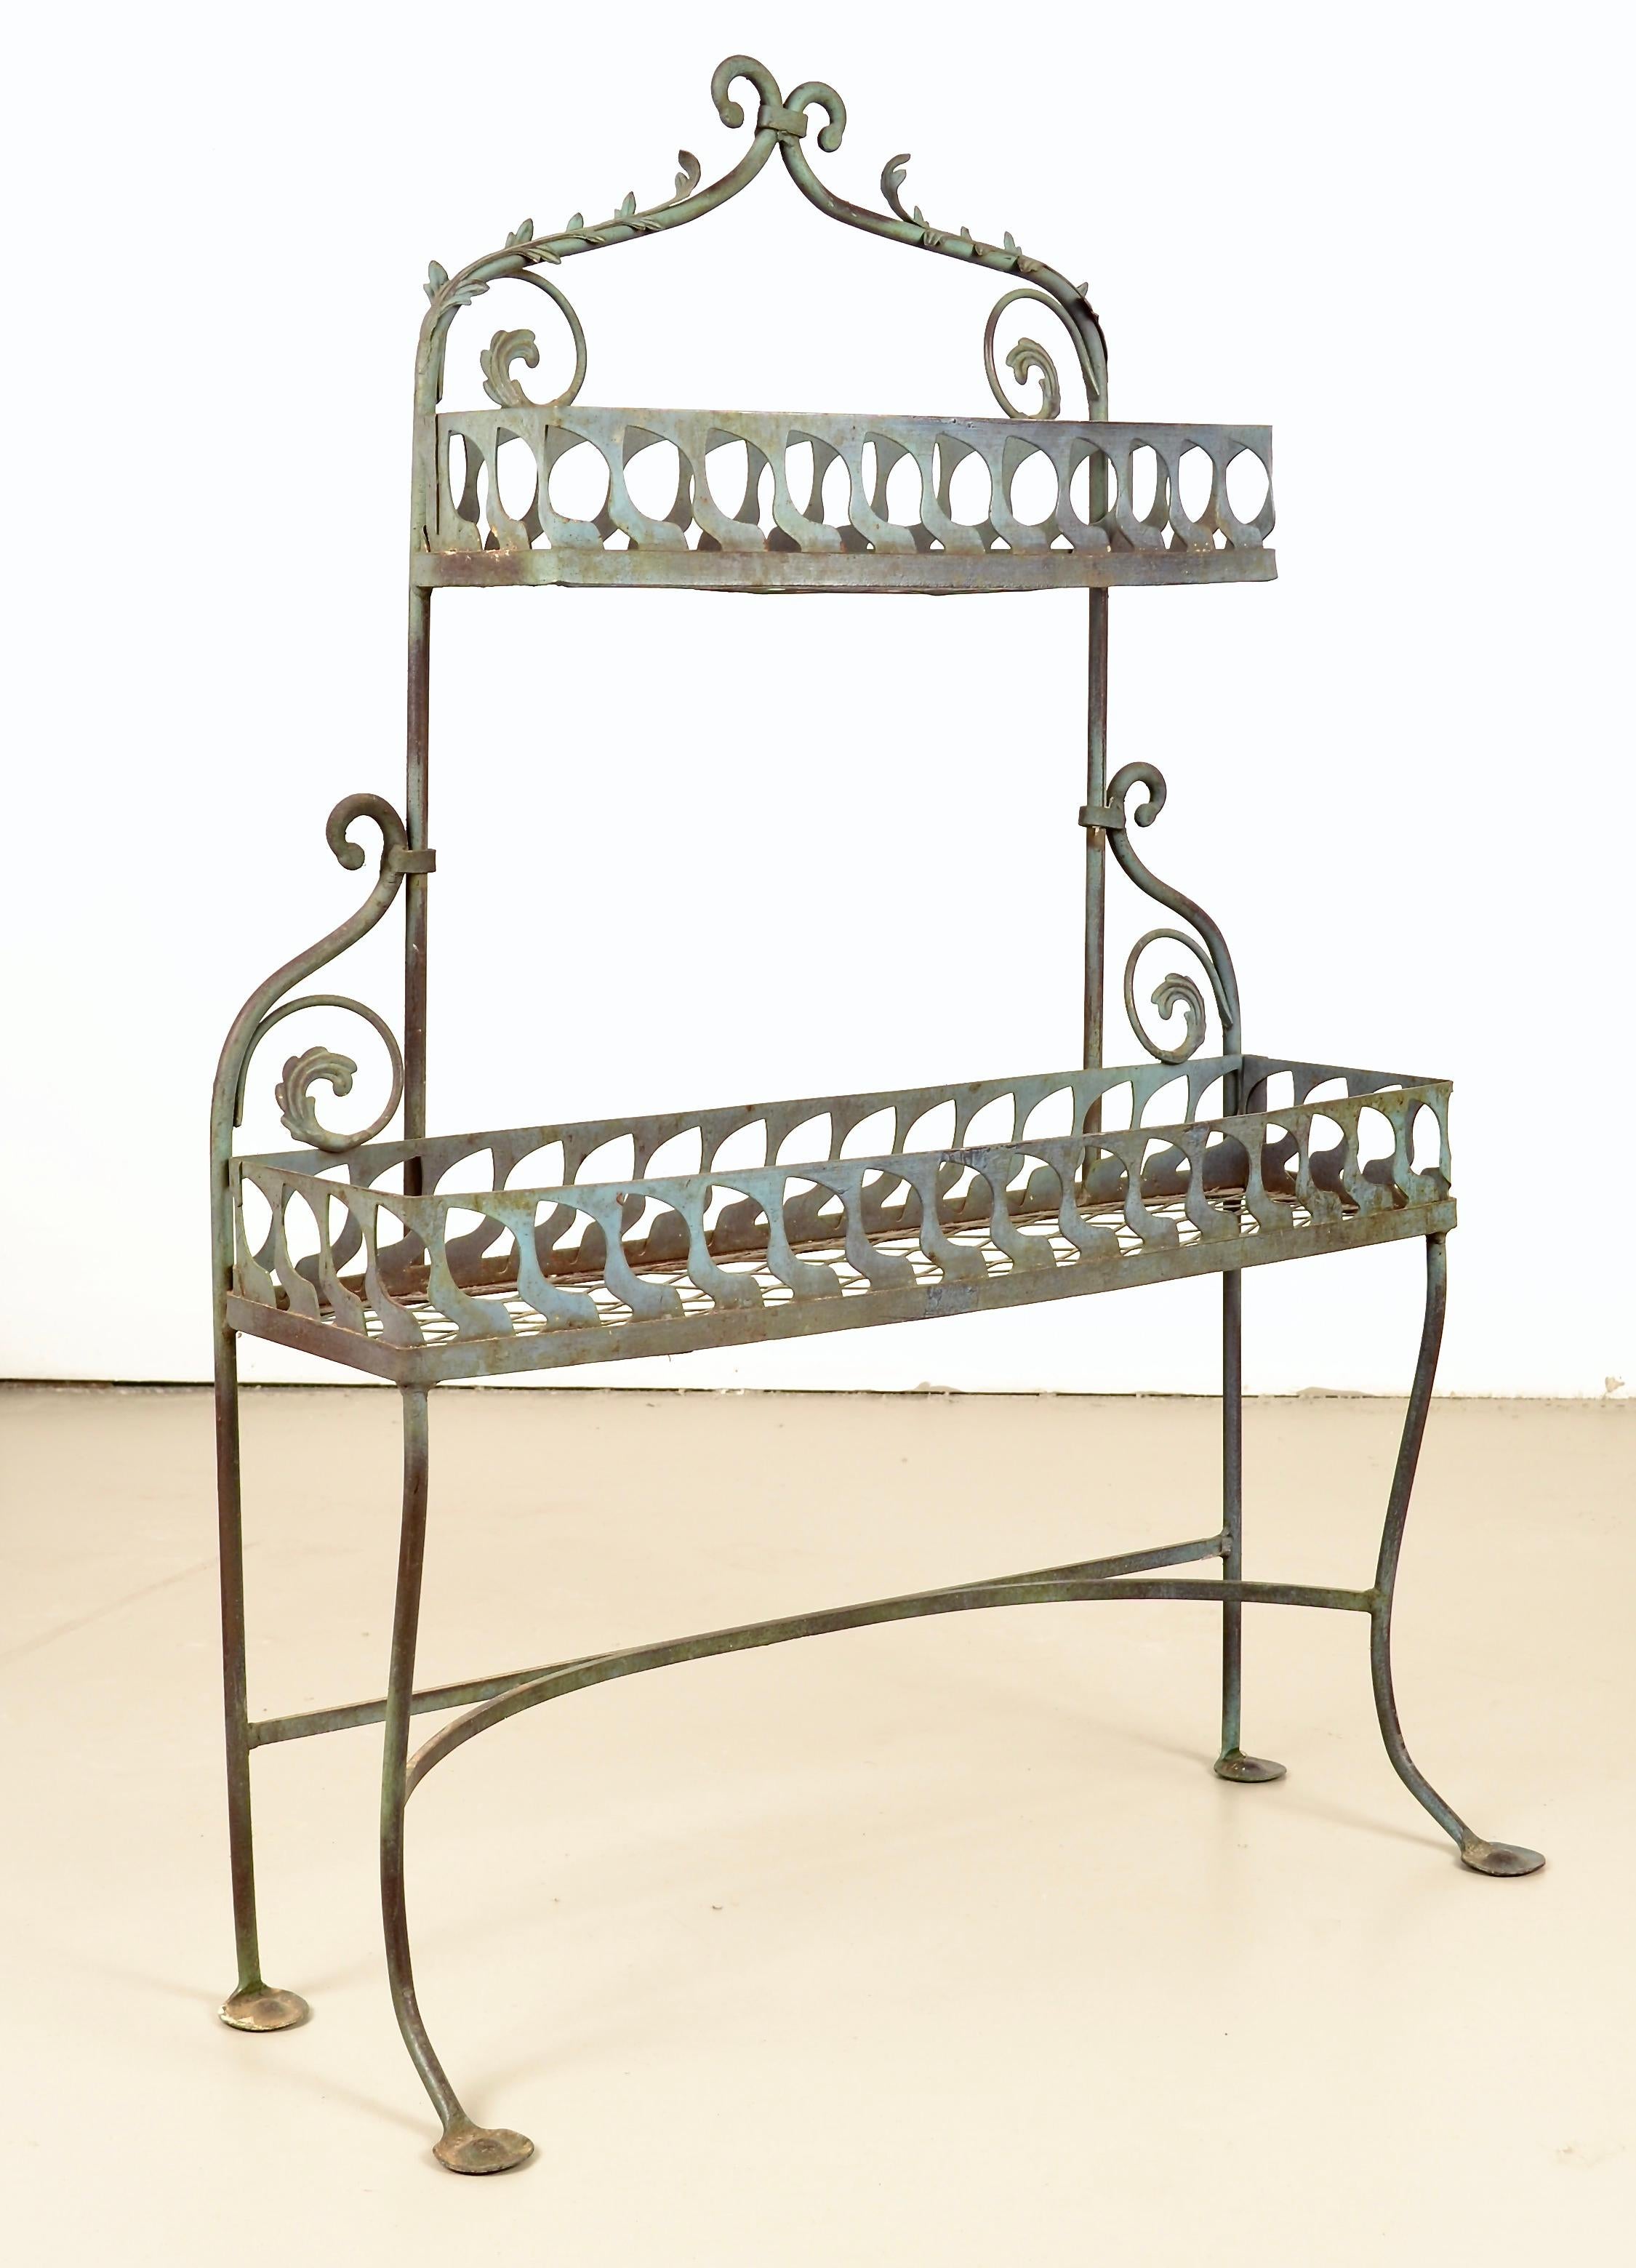 Made by Salterini and purchased by original owners in 1957, this handsome plant stand was powder coated in the classic Salterini seafoam color. The planter has great heft and very fine sturdy construction, no erosion at all in the iron. The original